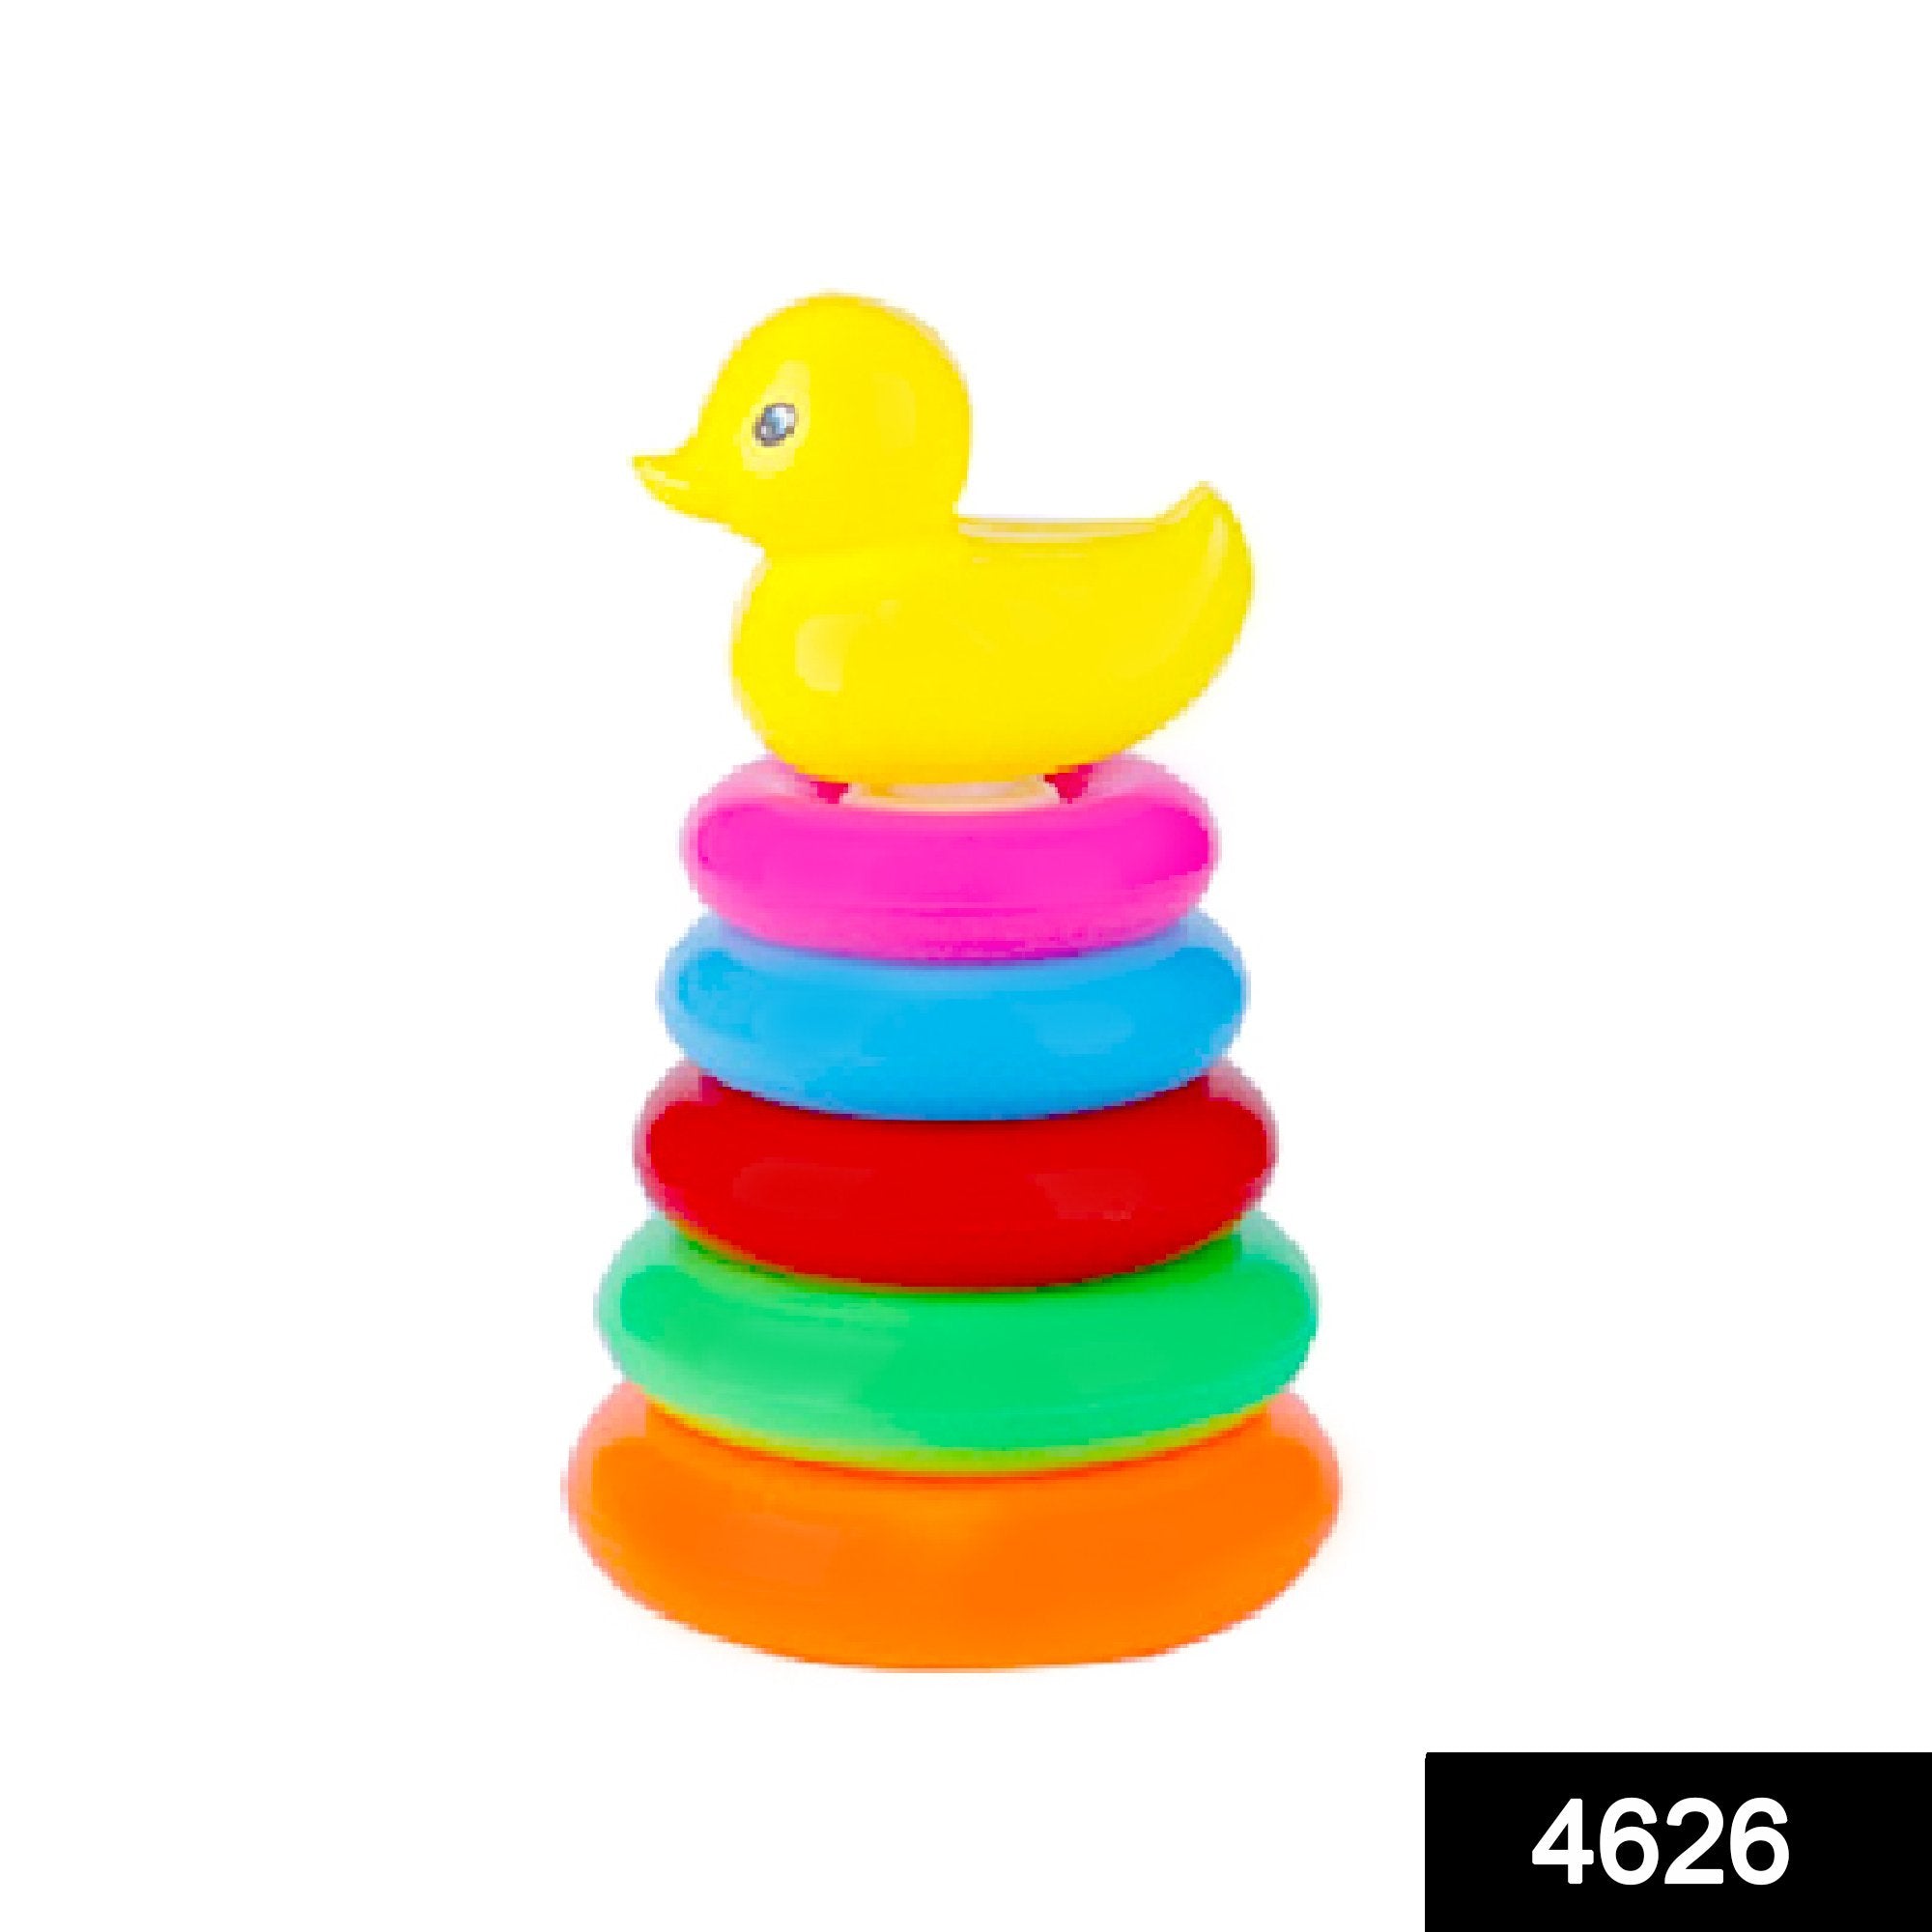 4626 Plastic Baby Kids Teddy Stacking Ring Jumbo Stack Up Educational Toy - SkyShopy